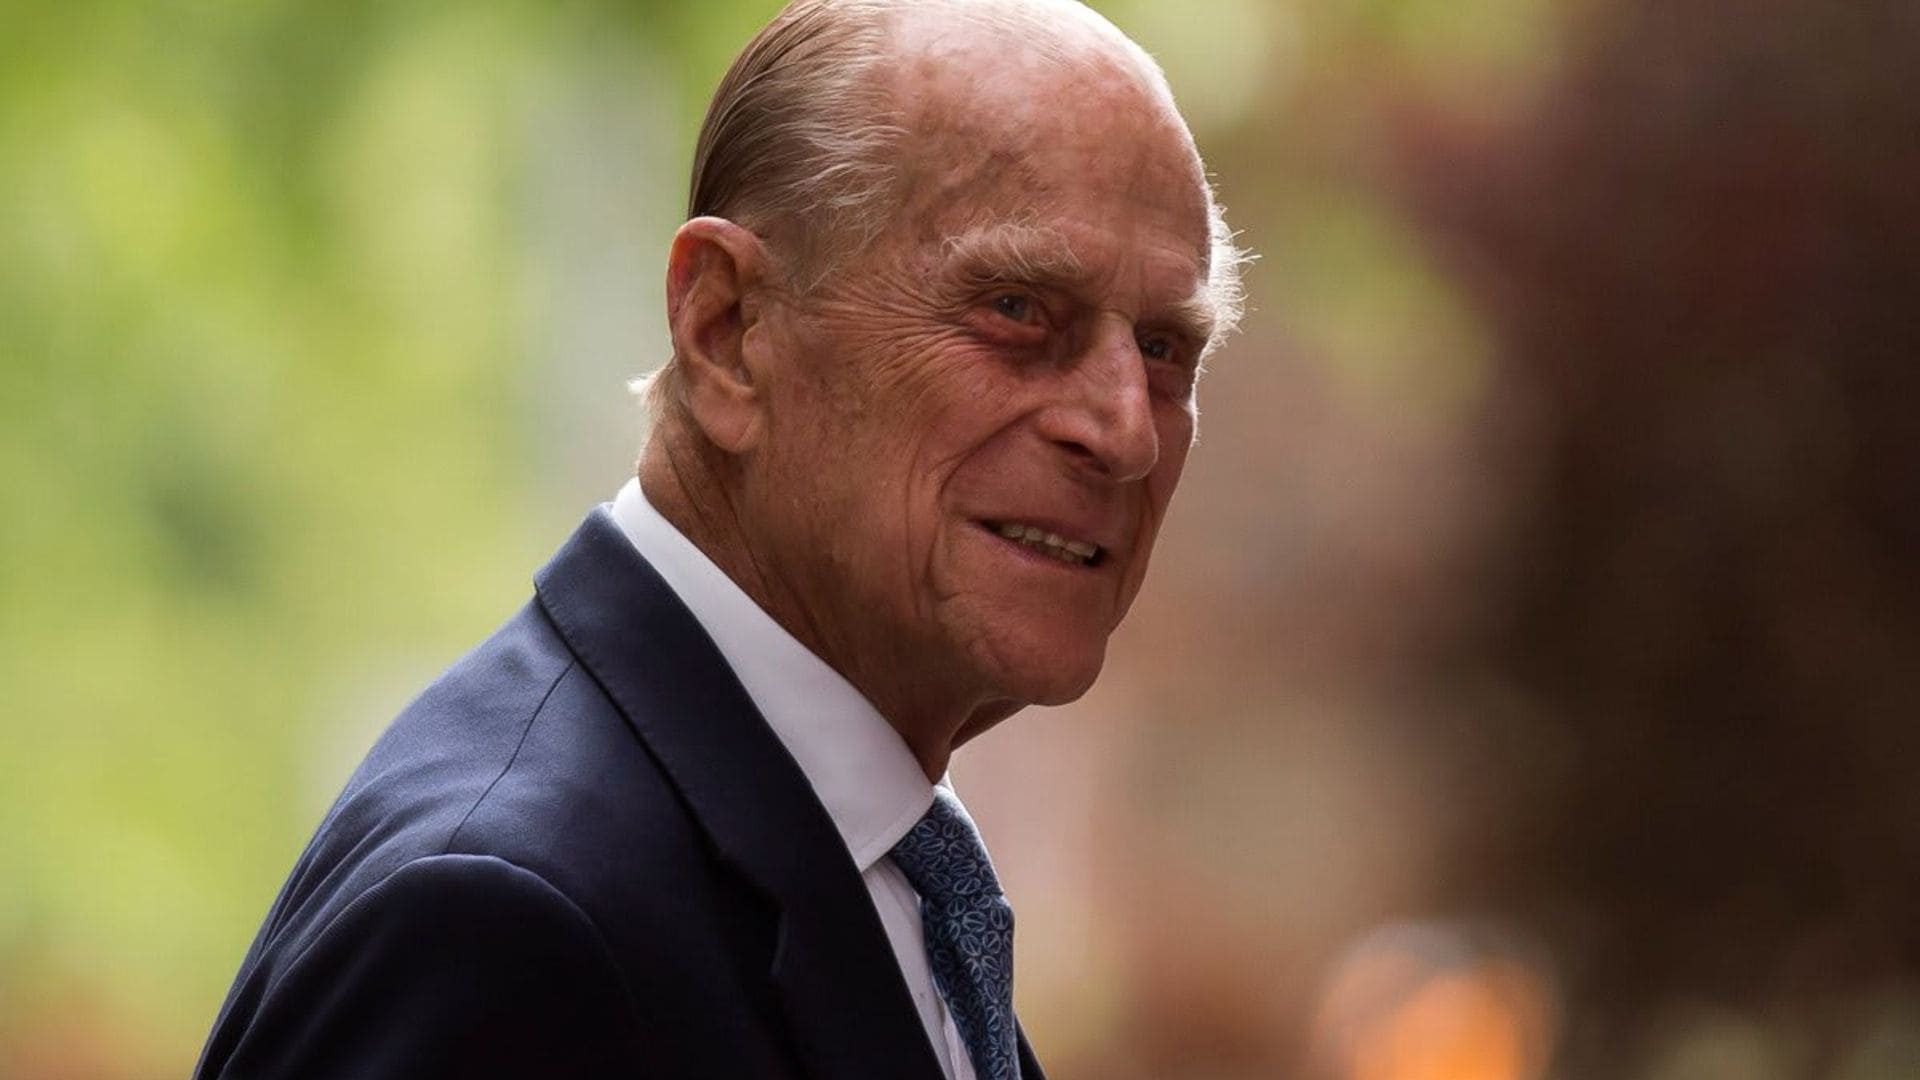 Prince Philip, 99, transferred to another hospital